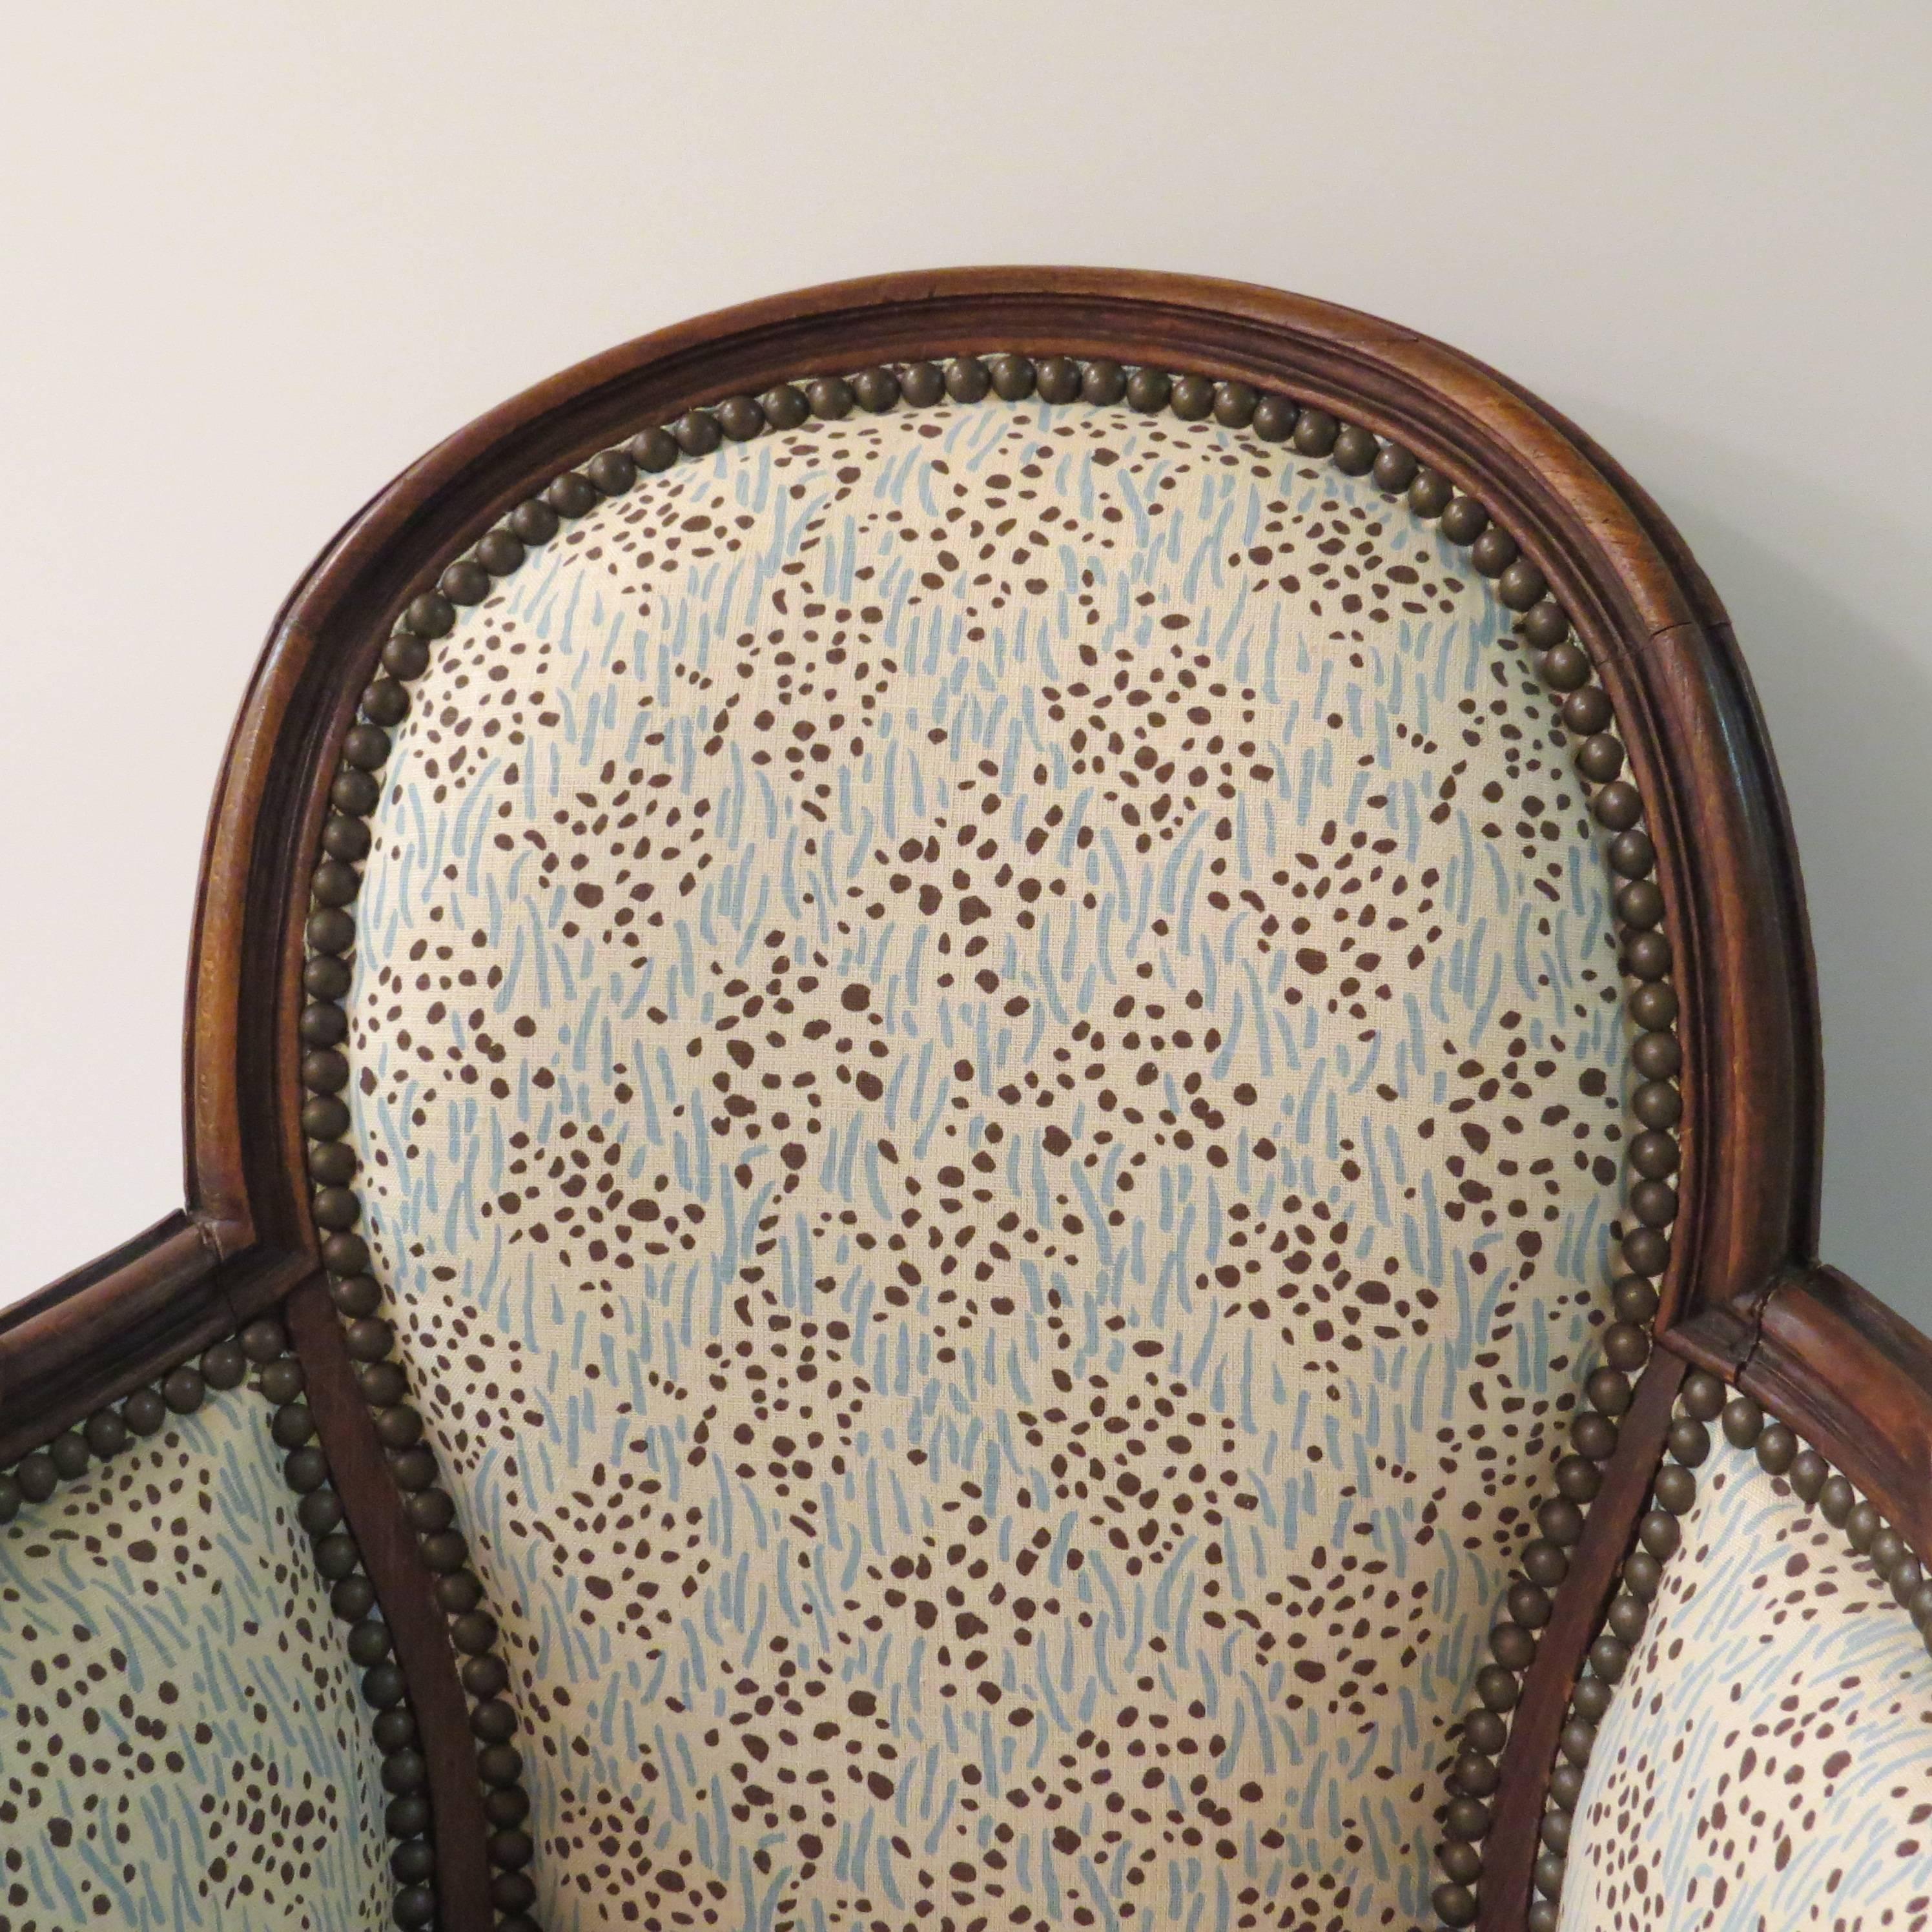 Petite bergere made from oak. New upholstery in patterned cotton with nail head trim, 20th century model from France.